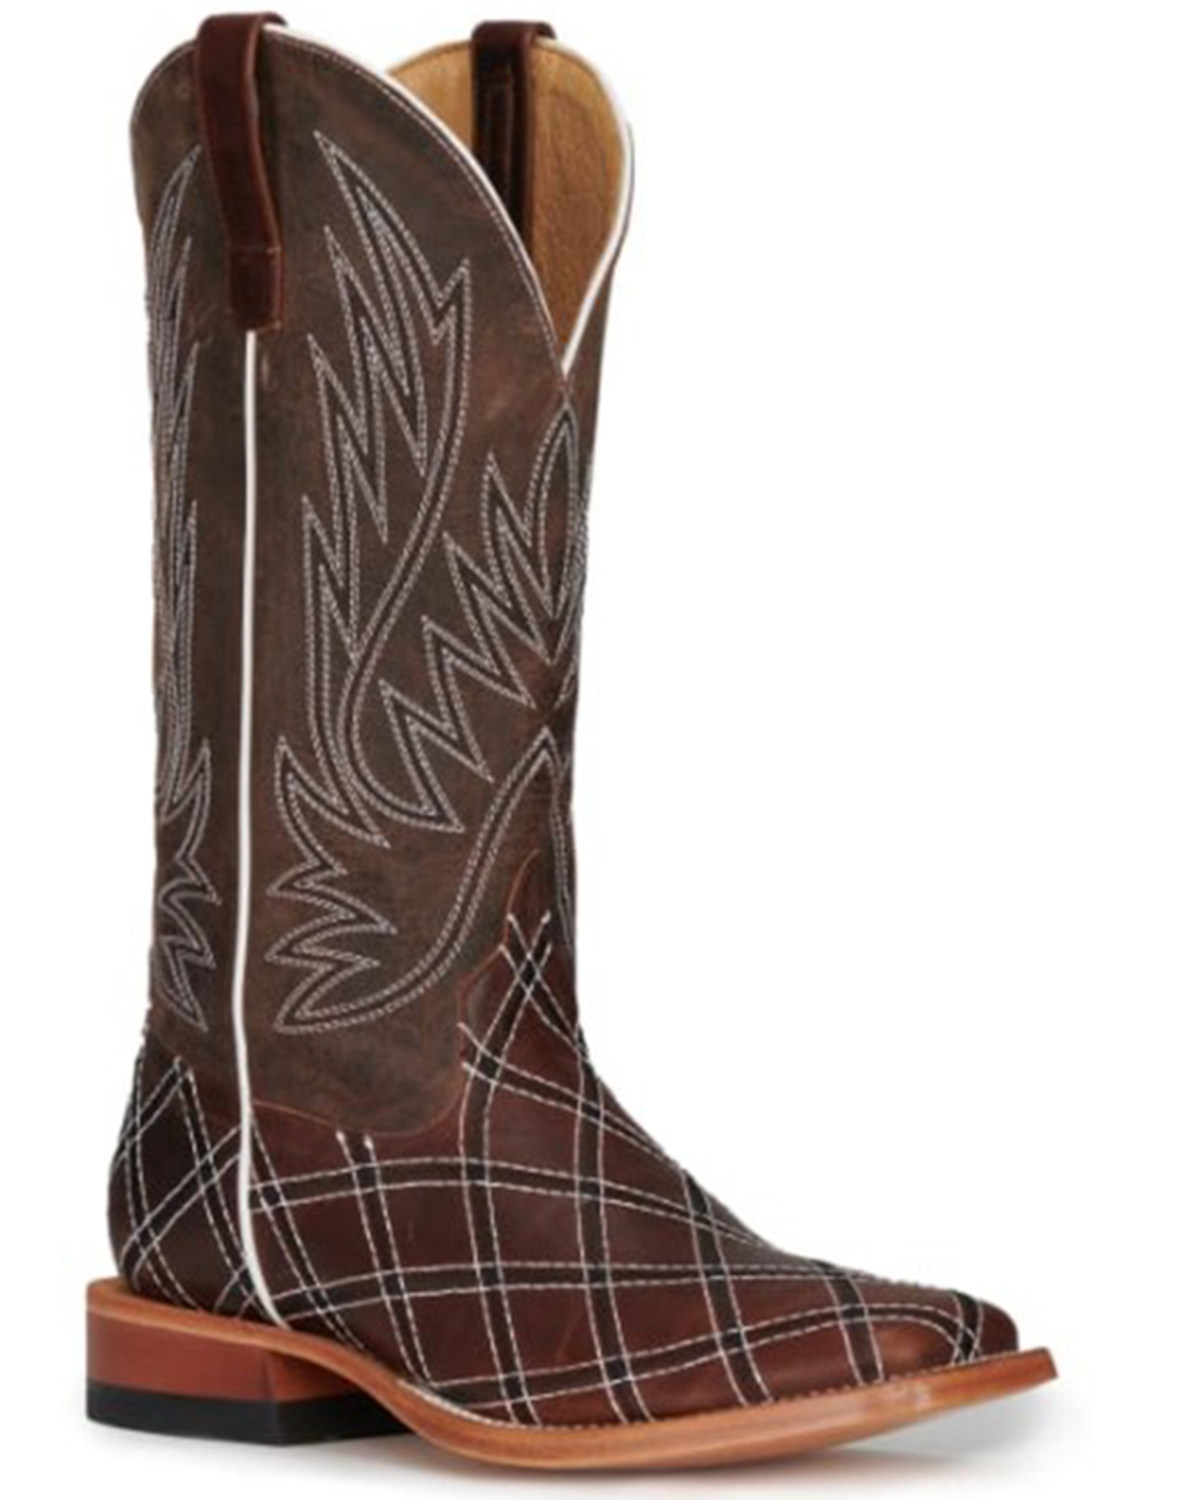 Horse Power Men's Sabotage Western Boots - Square Toe